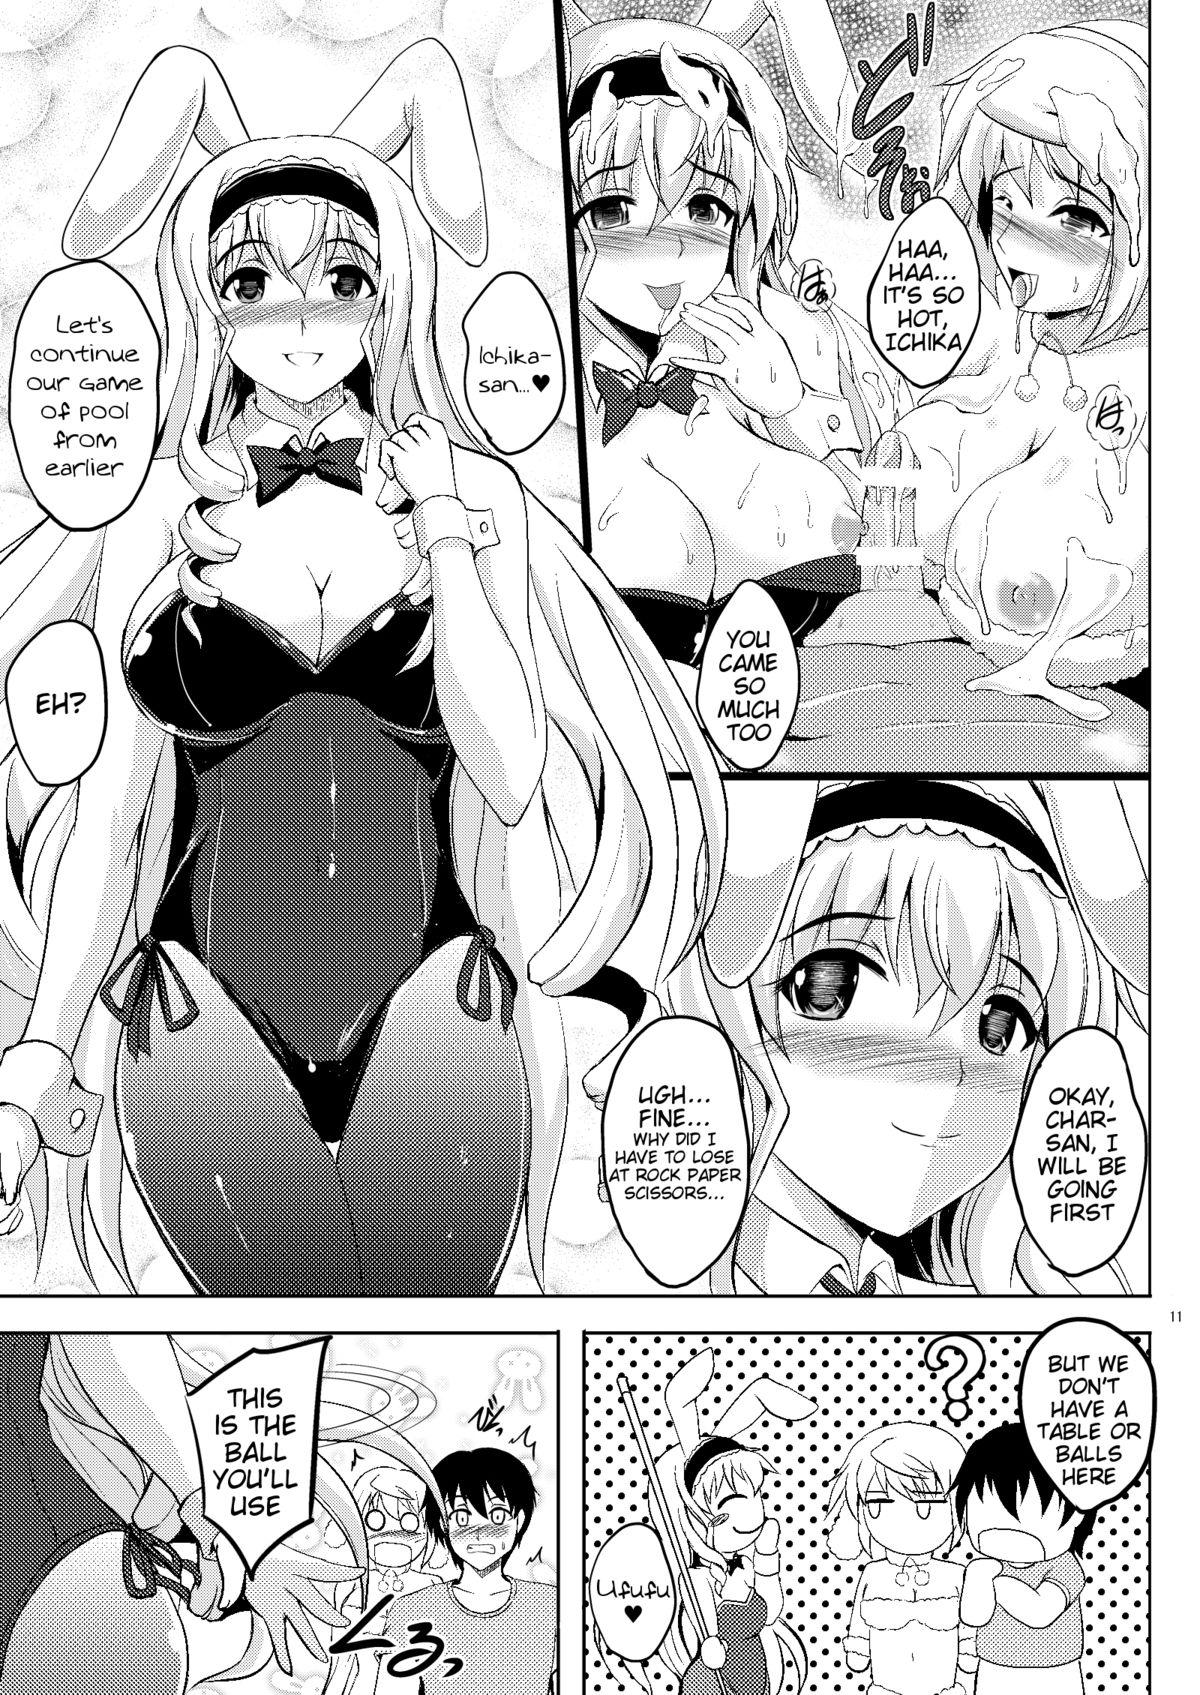 Assfingering Poodle & Bunny Time - Infinite stratos Colegiala - Page 11